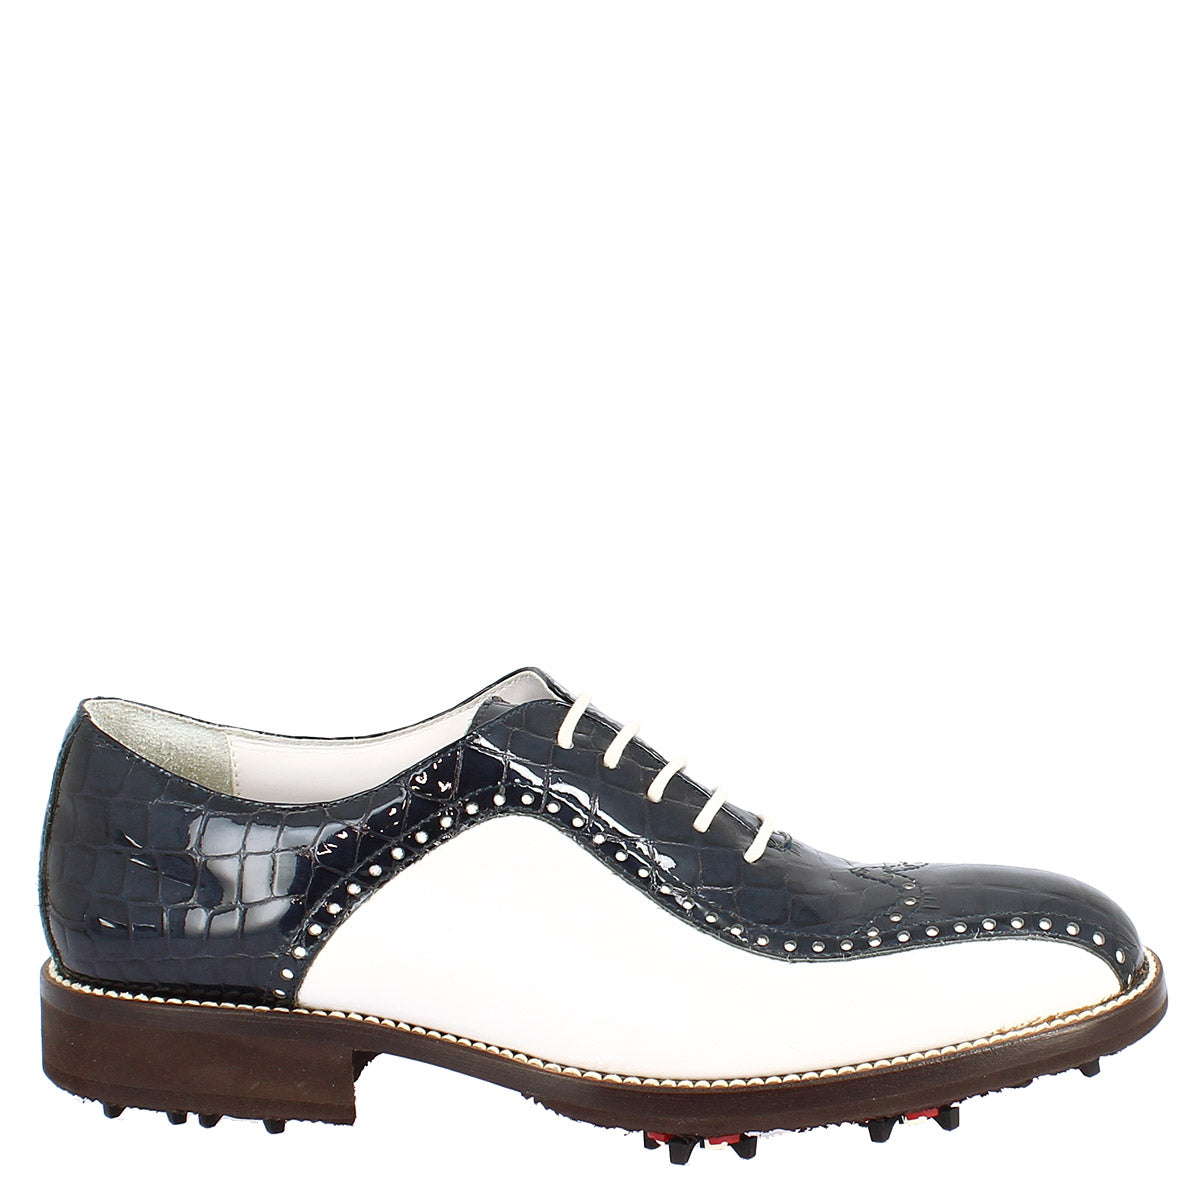 Handcrafted men's golf shoes in white full-grain leather coconut blue